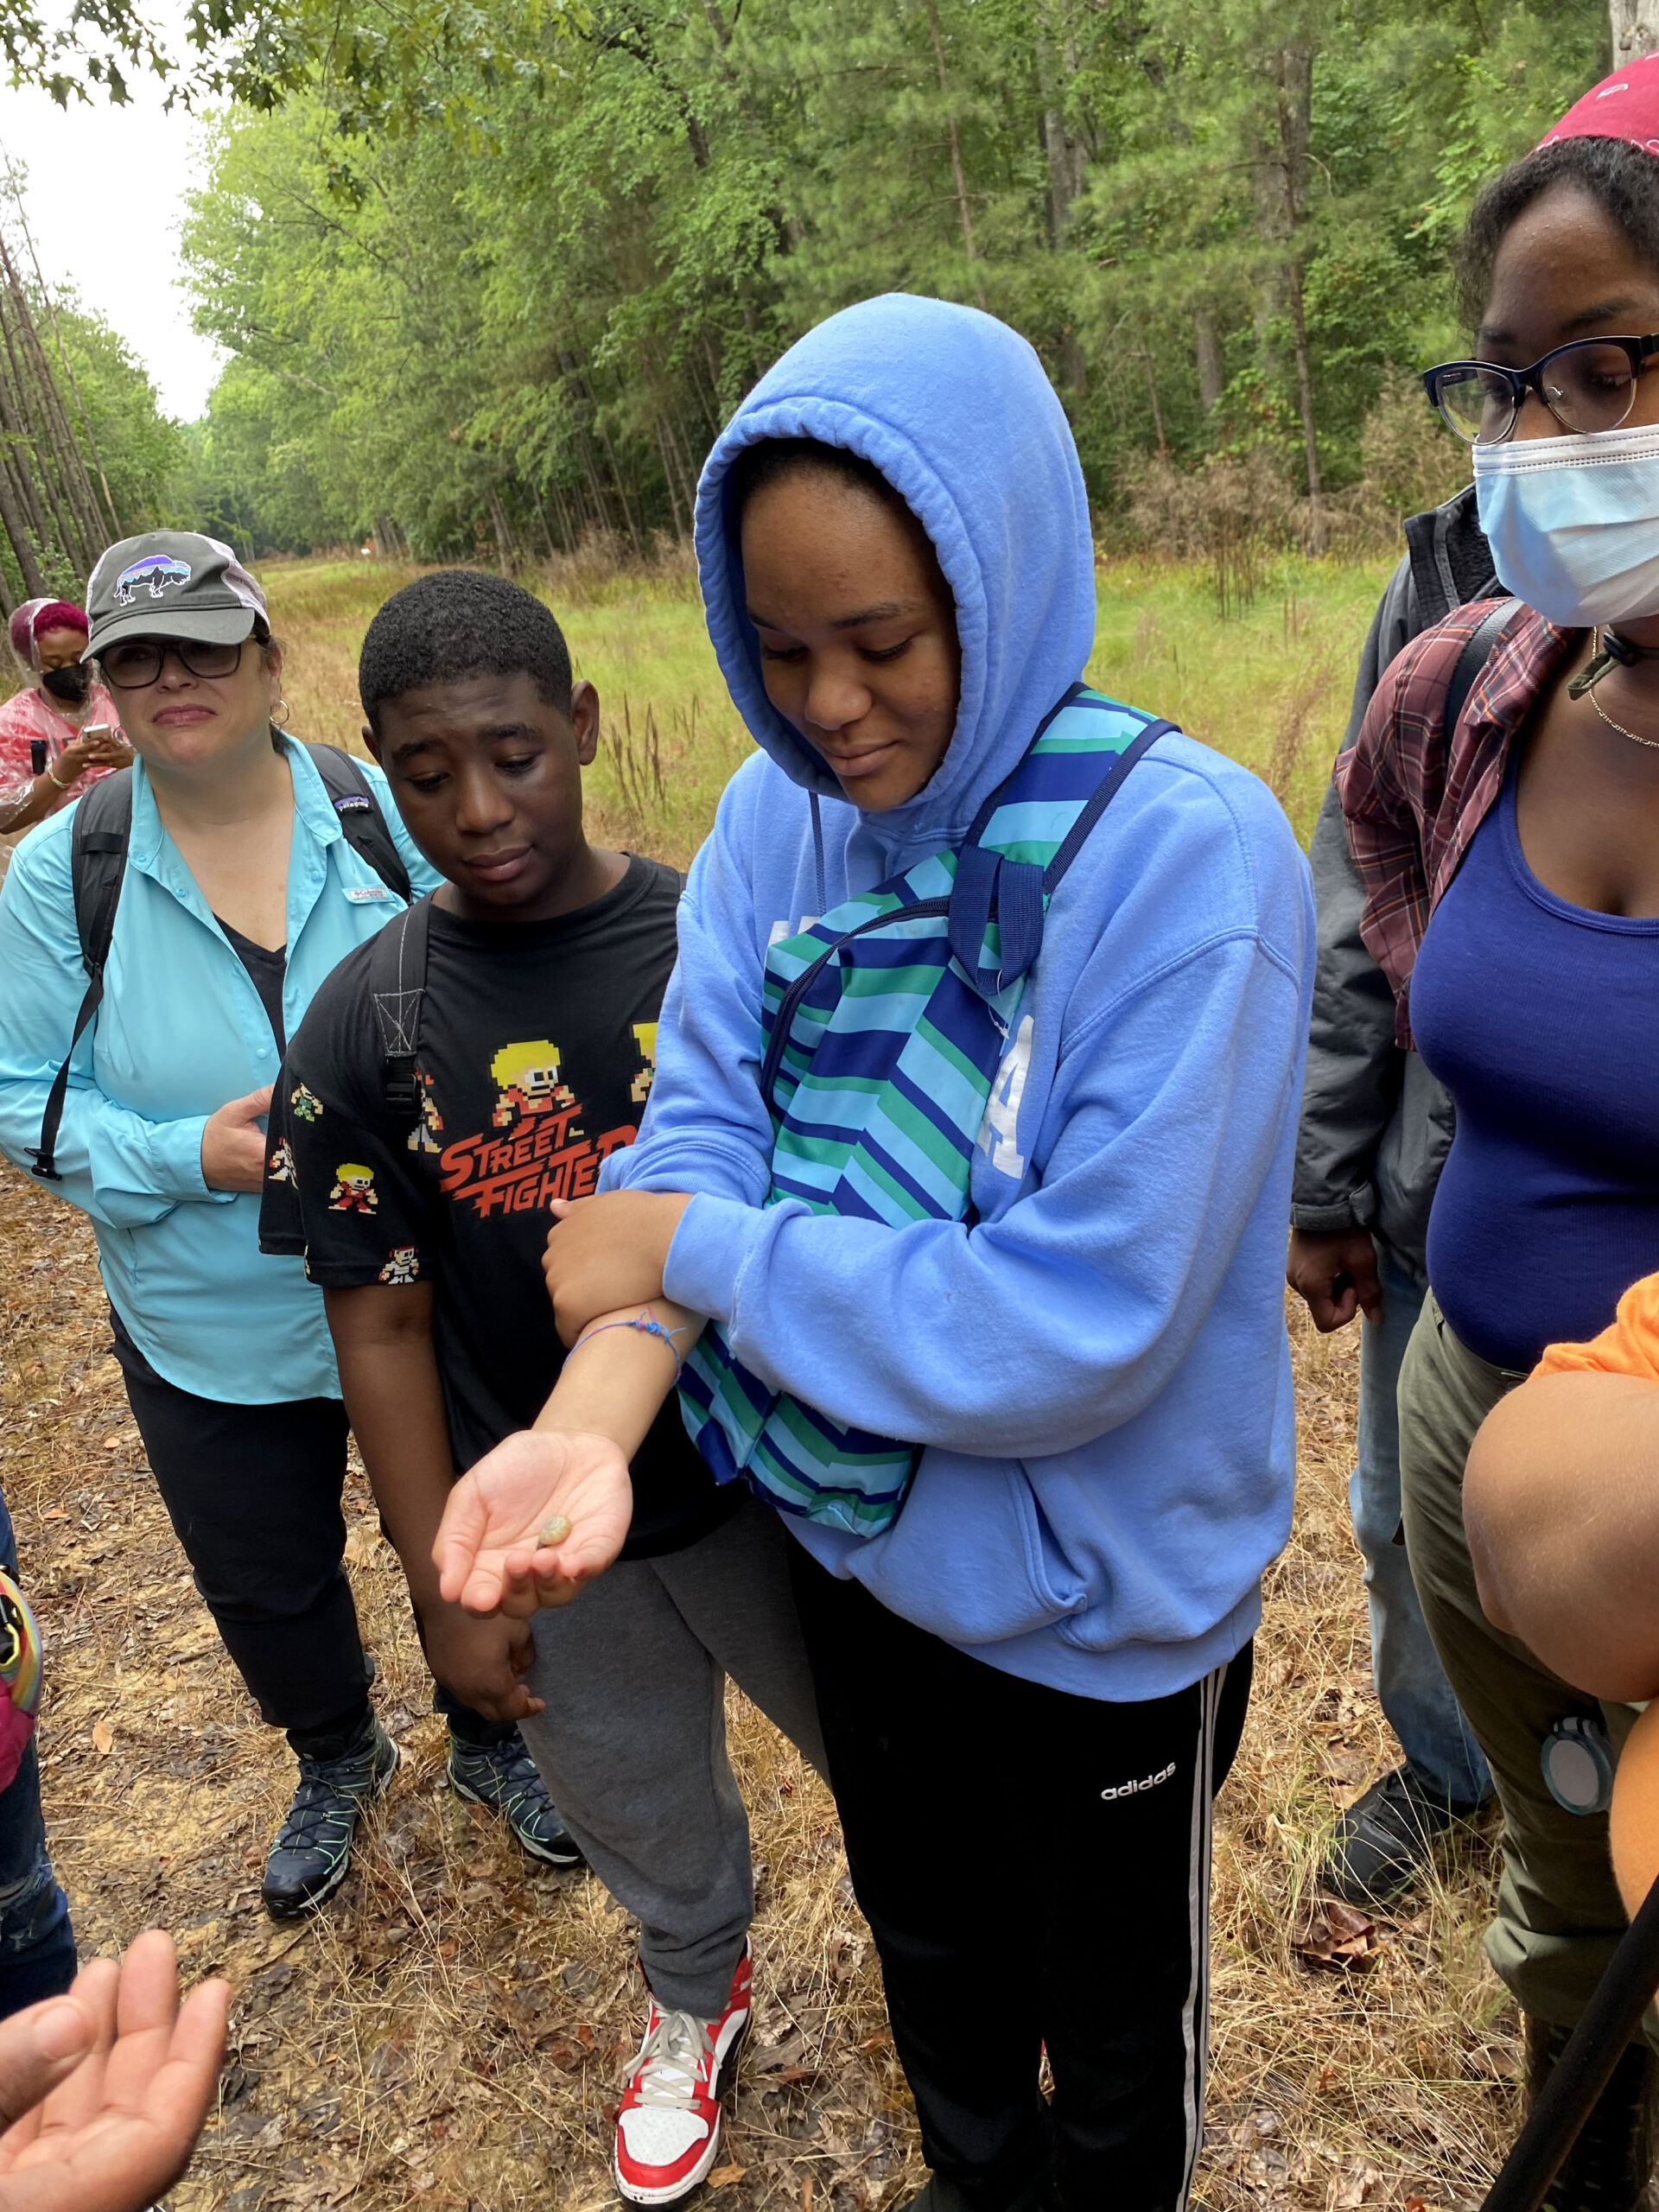 A group of students stand together in a forest clearing, looking at a snail that is curled in one of the students' hand.